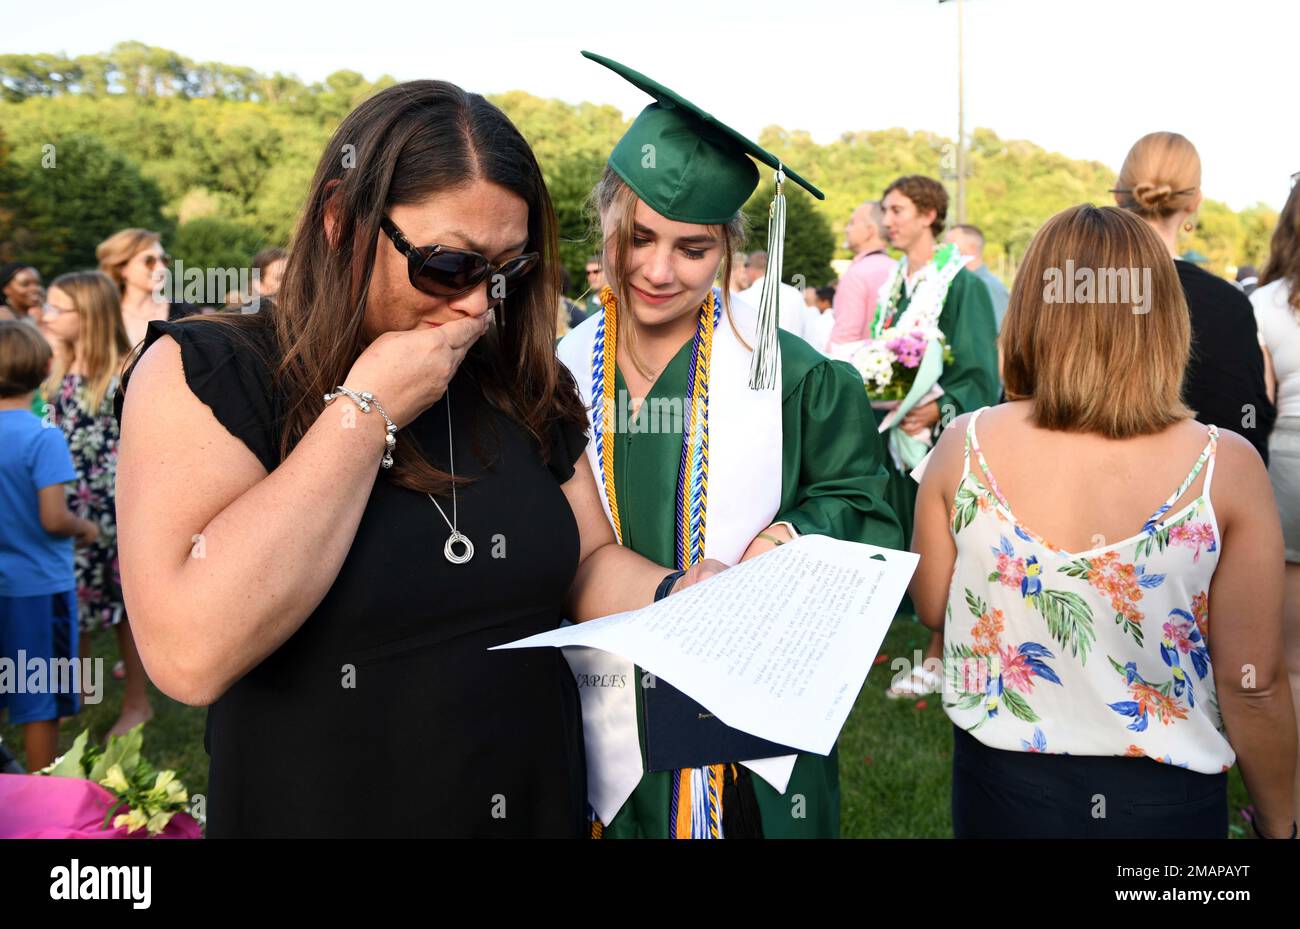 220602-N-IE405-2177 POZZUOLI, Italy (June 2, 2022) Jennifer Stewart, left, reads an appreciation letter from her daughter Sydney Stewart during the Class of 2022 graduation ceremony at U.S. Naval Support Activity (NSA) Naples' Carney Park in Pozzuoli, Italy, June 2, 2022. NSA Naples is an operational ashore base that enables U.S., allied, and partner nation forces to be where they are needed, when they are needed to ensure security and stability in the European, African, and Central Command areas of responsibility. Stock Photo